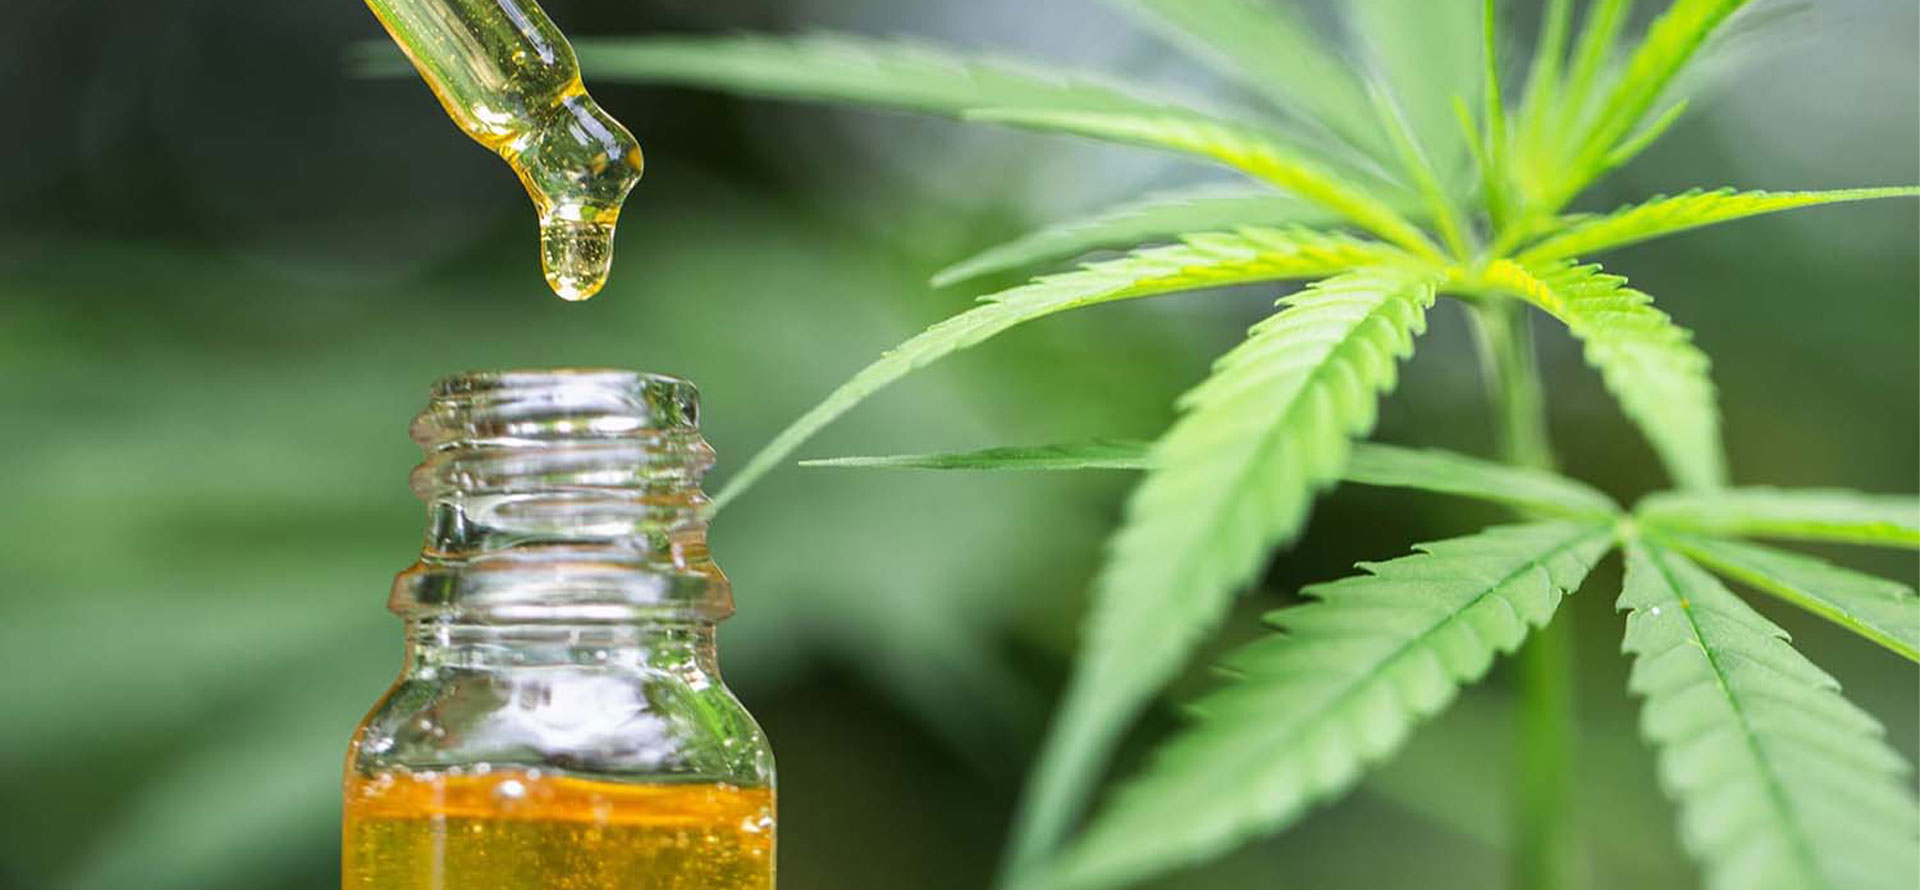 CBC OIL QUAD CITIES - Cbd|Oil|Benefits|Cbc|Effects|Pain|Study|Health|Thc|Products|Cannabinoids|Studies|Research|Anxiety|Cannabis|Symptoms|Evidence|People|System|Disease|Treatment|Inflammation|Hemp|Body|Receptors|Disorders|Brain|Plant|Cells|Side|Effect|Blood|Patients|Cancer|Product|Skin|Marijuana|Properties|Cannabidiol|Cannabinoid|Cbd Oil|Cbd Products|Cbc Oil|Side Effects|Endocannabinoid System|Chronic Pain|Multiple Sclerosis|Pain Relief|Cannabis Plant|Cbd Oil Benefits|Blood Pressure|Health Benefits|High Blood Pressure|Anti-Inflammatory Properties|Neuropathic Pain|Animal Studies|Hemp Plant|Hemp Oil|Anxiety Disorders|Cbd Product|Immune System|Clinical Trials|Cbd Gummies|Nerve Cells|Nervous System|Entourage Effect|Hemp Seed Oil|United States|Cbd Oils|Drug Administration